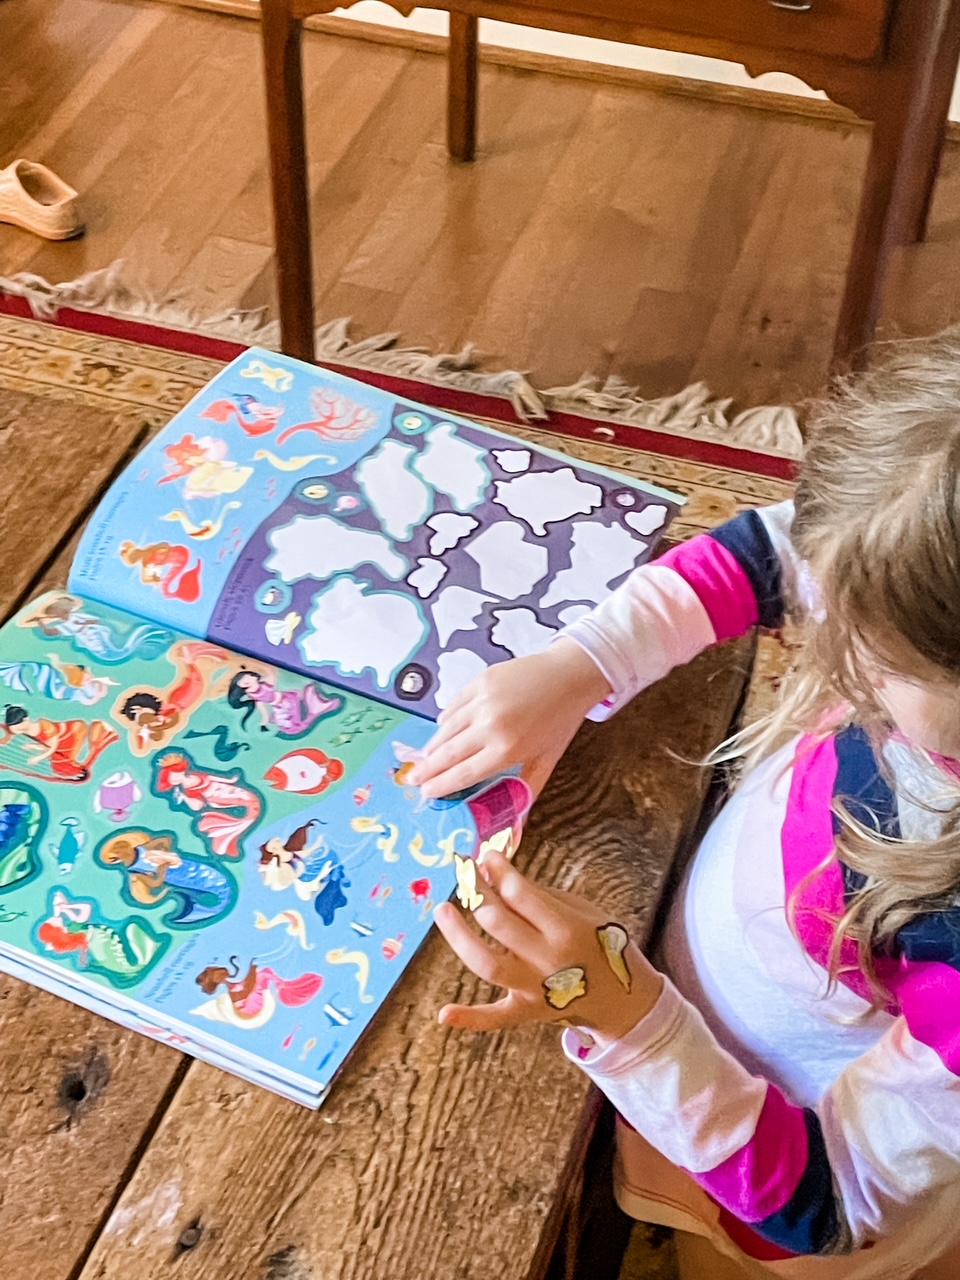 Unplugged Activities for Kids: Marie's granddaughter playing with a sticker book